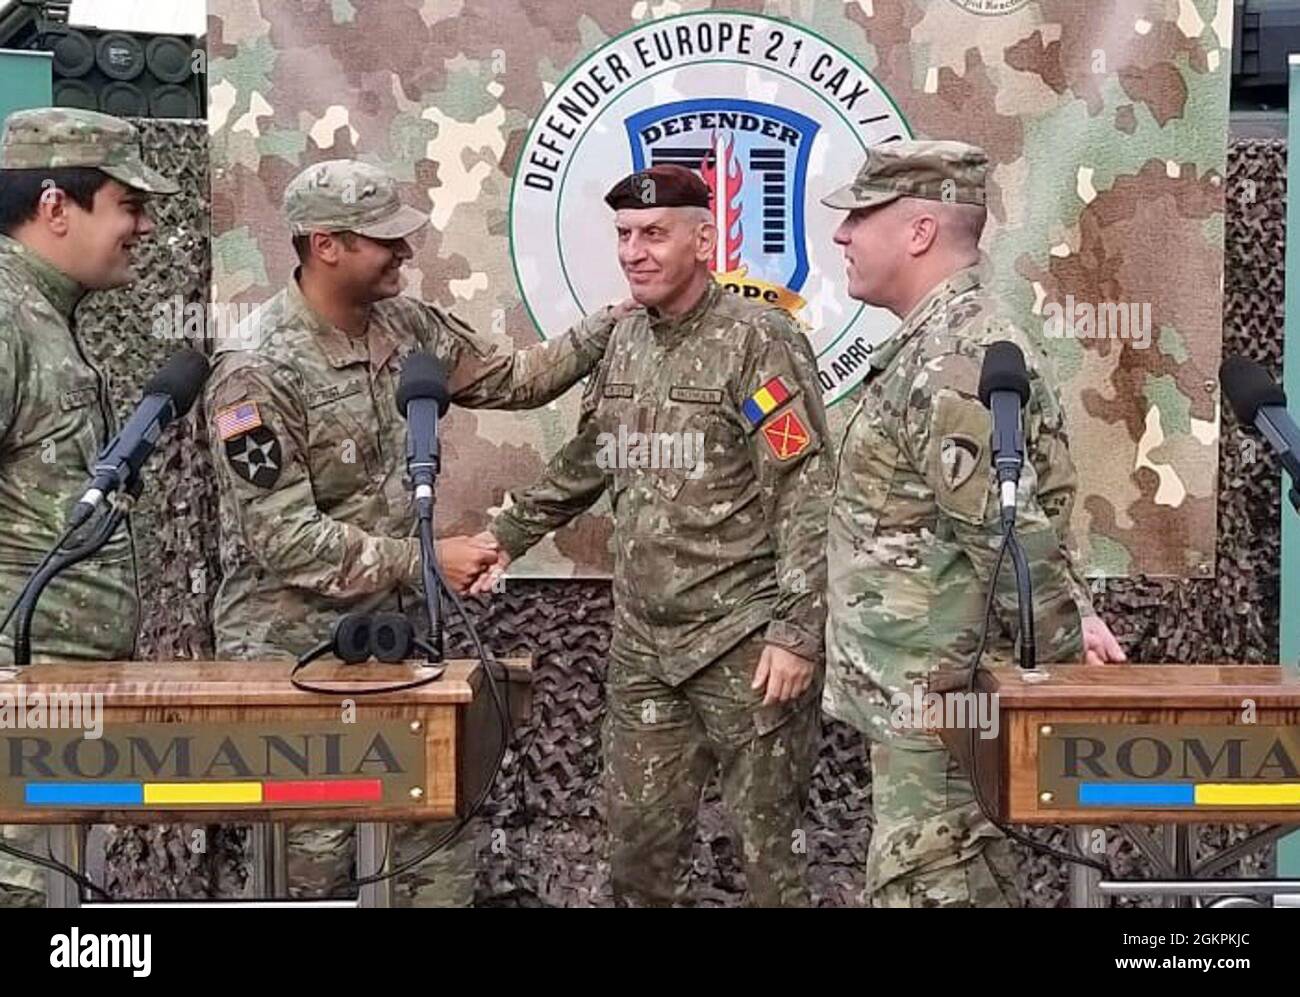 U.S. Army Reserve Maj. Allen Rust, an air and missile defense chief with the 209th Digital Liaison Detachment, 7th Mission Support Command, left, shakes hands with Romanian Army Col. Adrian Petrica of the Multi-National Command Southeast, at the close of a DEFENDER-Europe 21 command post exercise in Bucharest, Romania, June 14, 2021. The 209th DLD provided liaison capability between the U.S. Army´s V Corps, Joint Force Land Component Command and the Romanian MNC-SE. Stock Photo